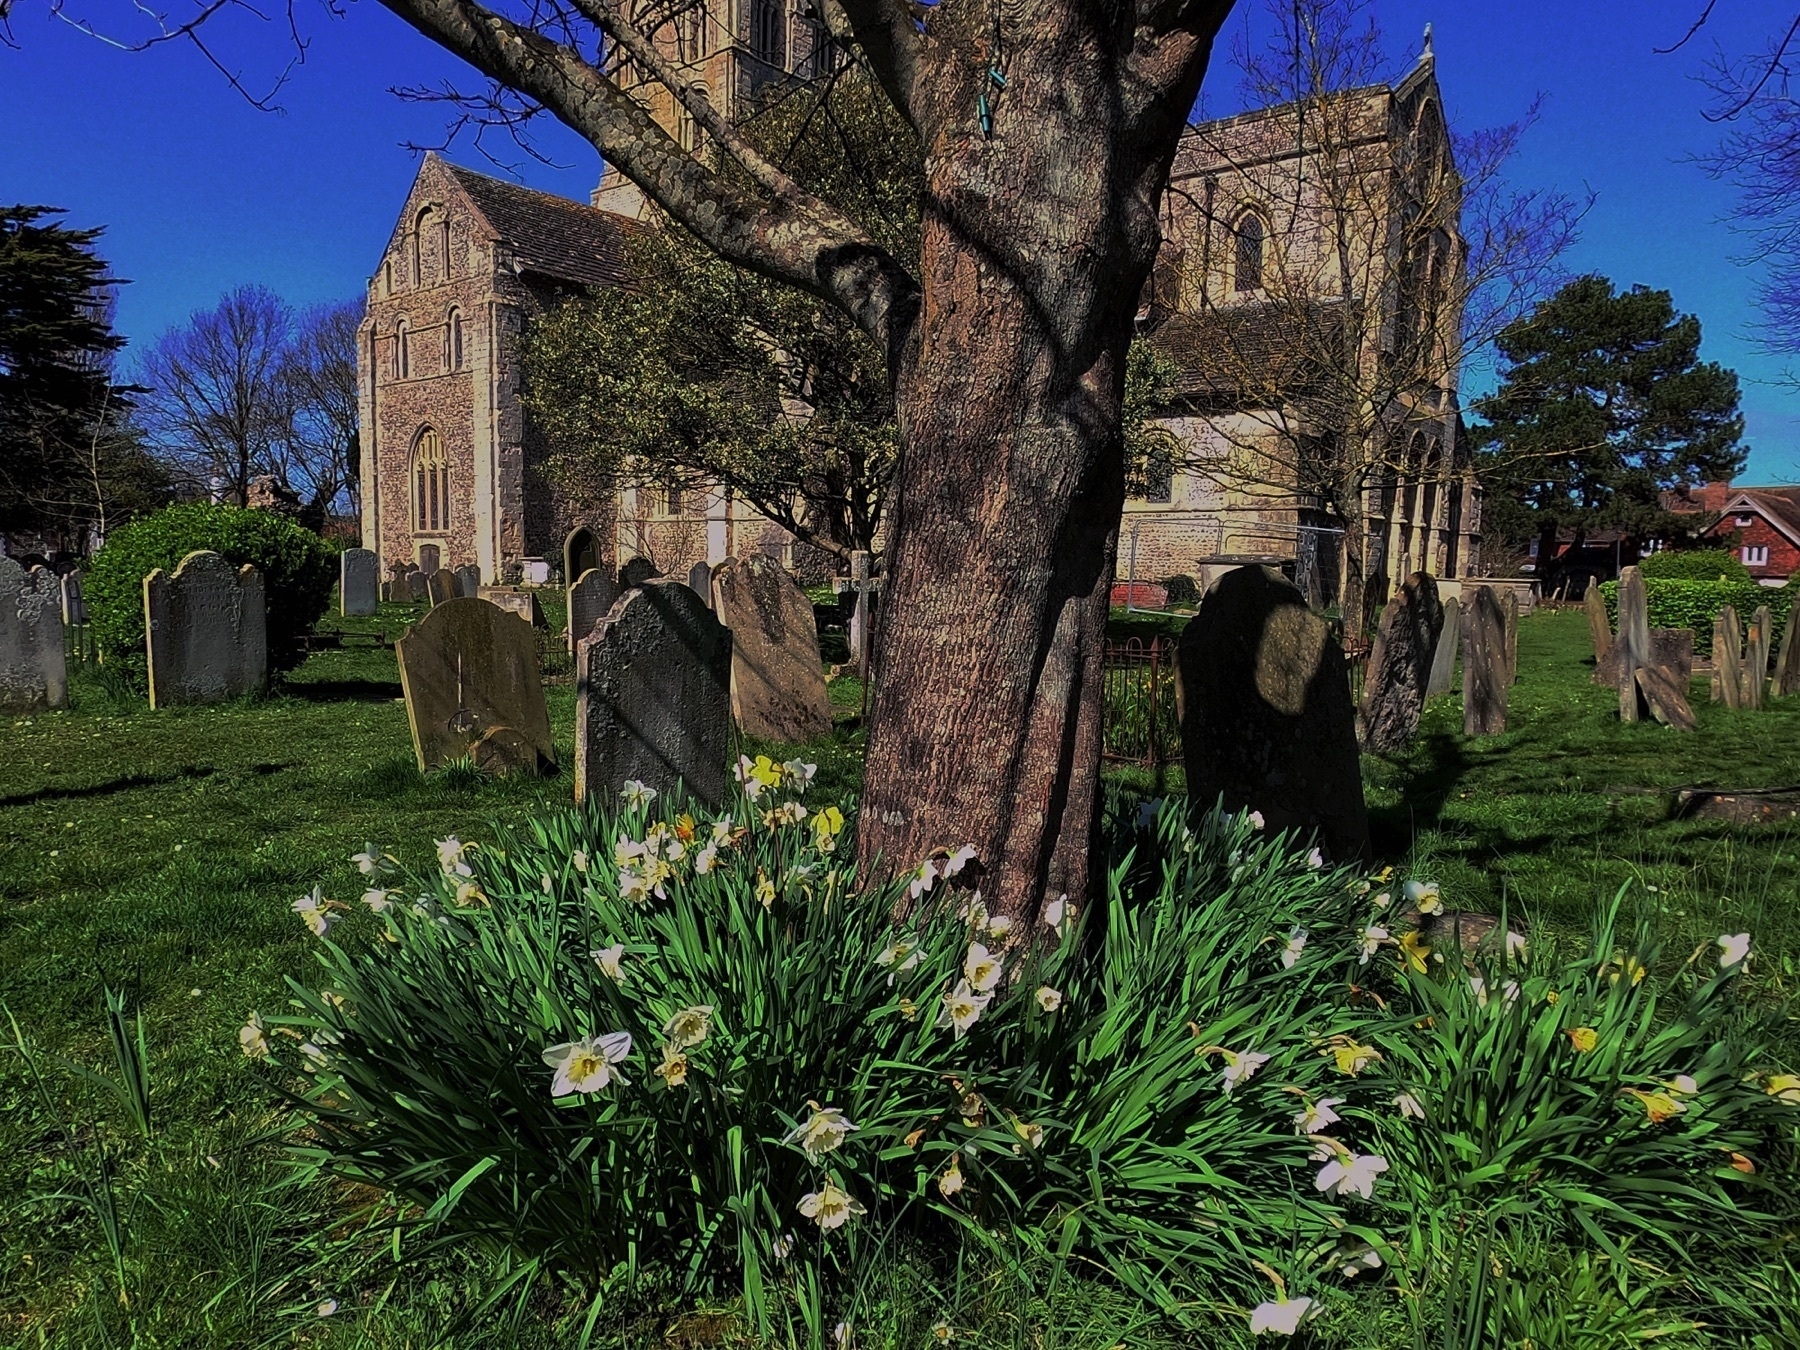 Trees and daffodils in the churchyard of St Mary de Haura.